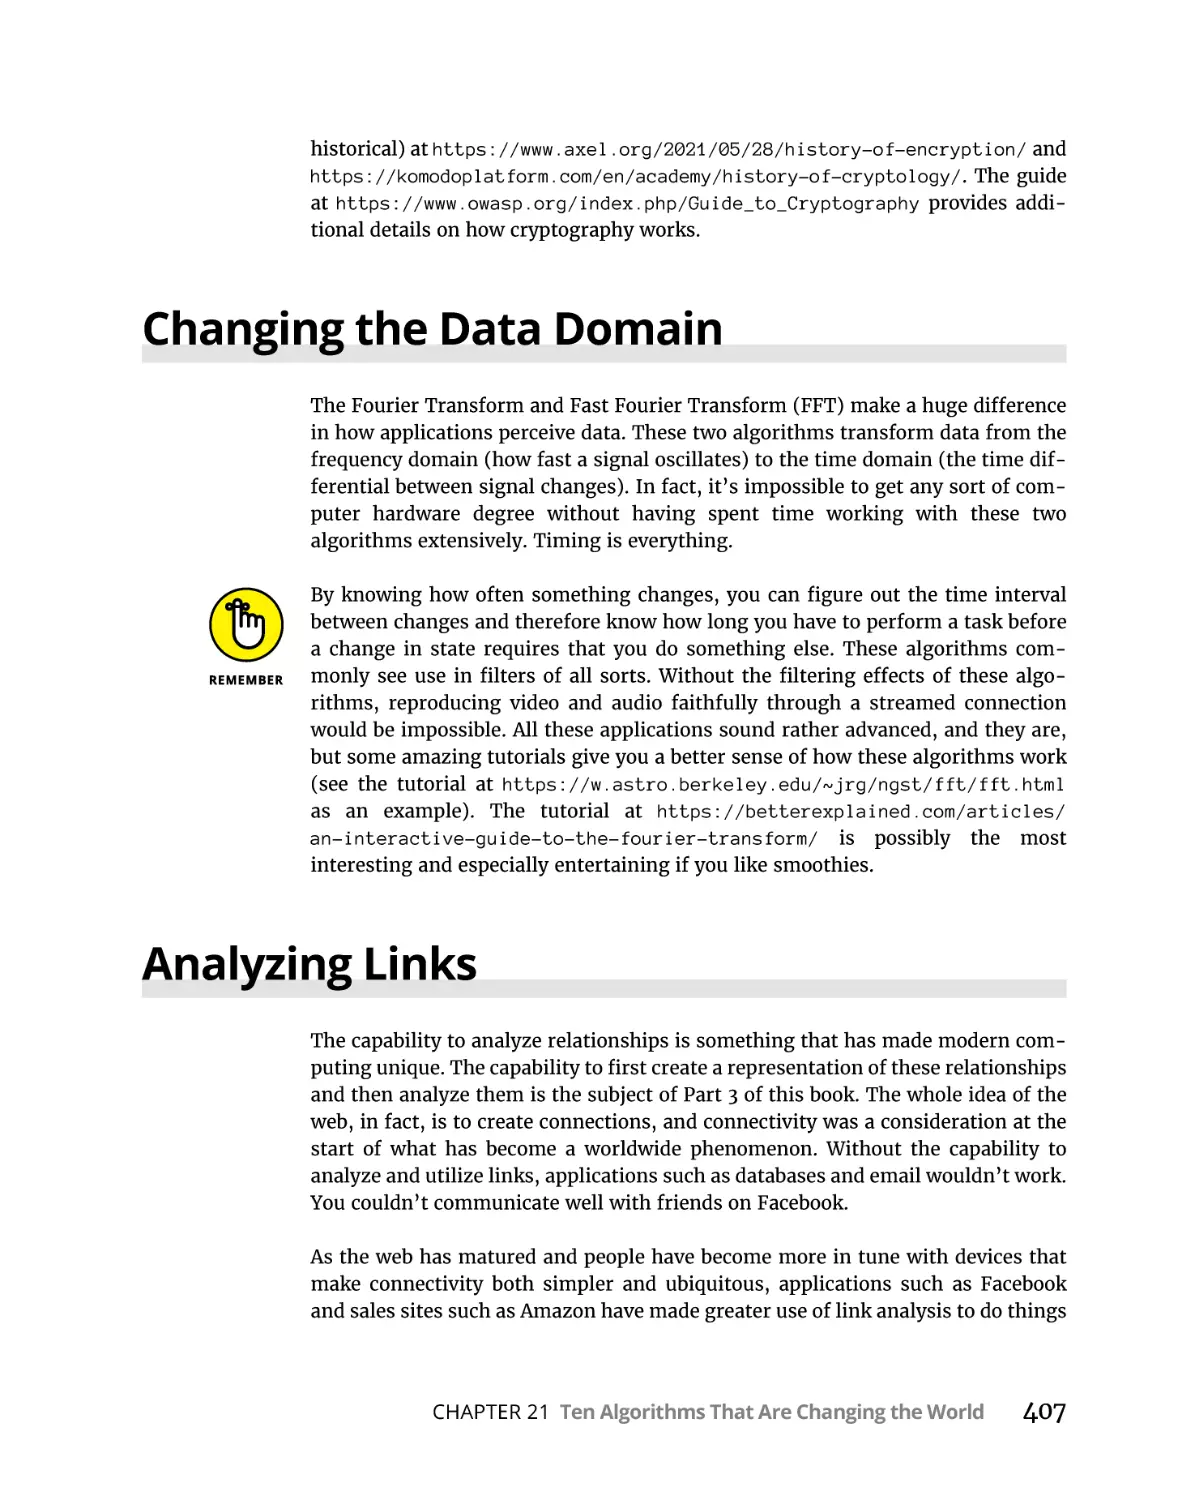 Changing the Data Domain
Analyzing Links